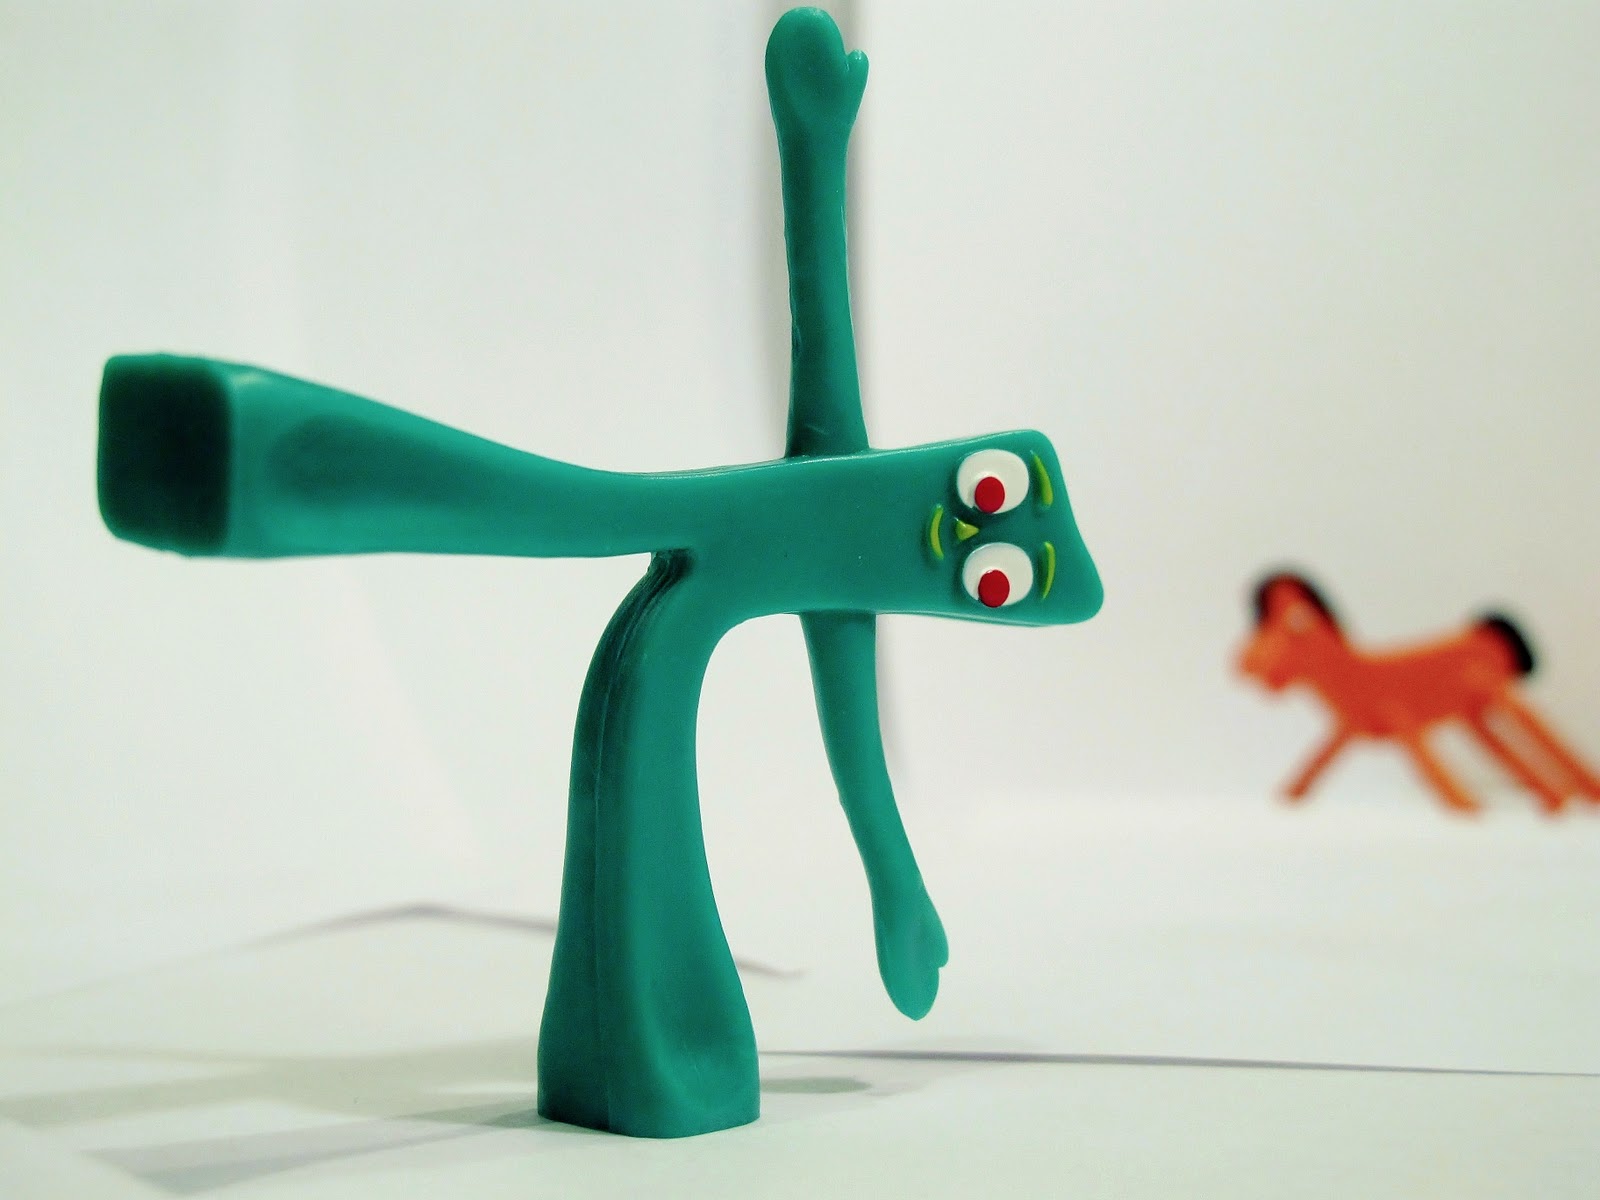 Introducing the adventures of Gumby! 